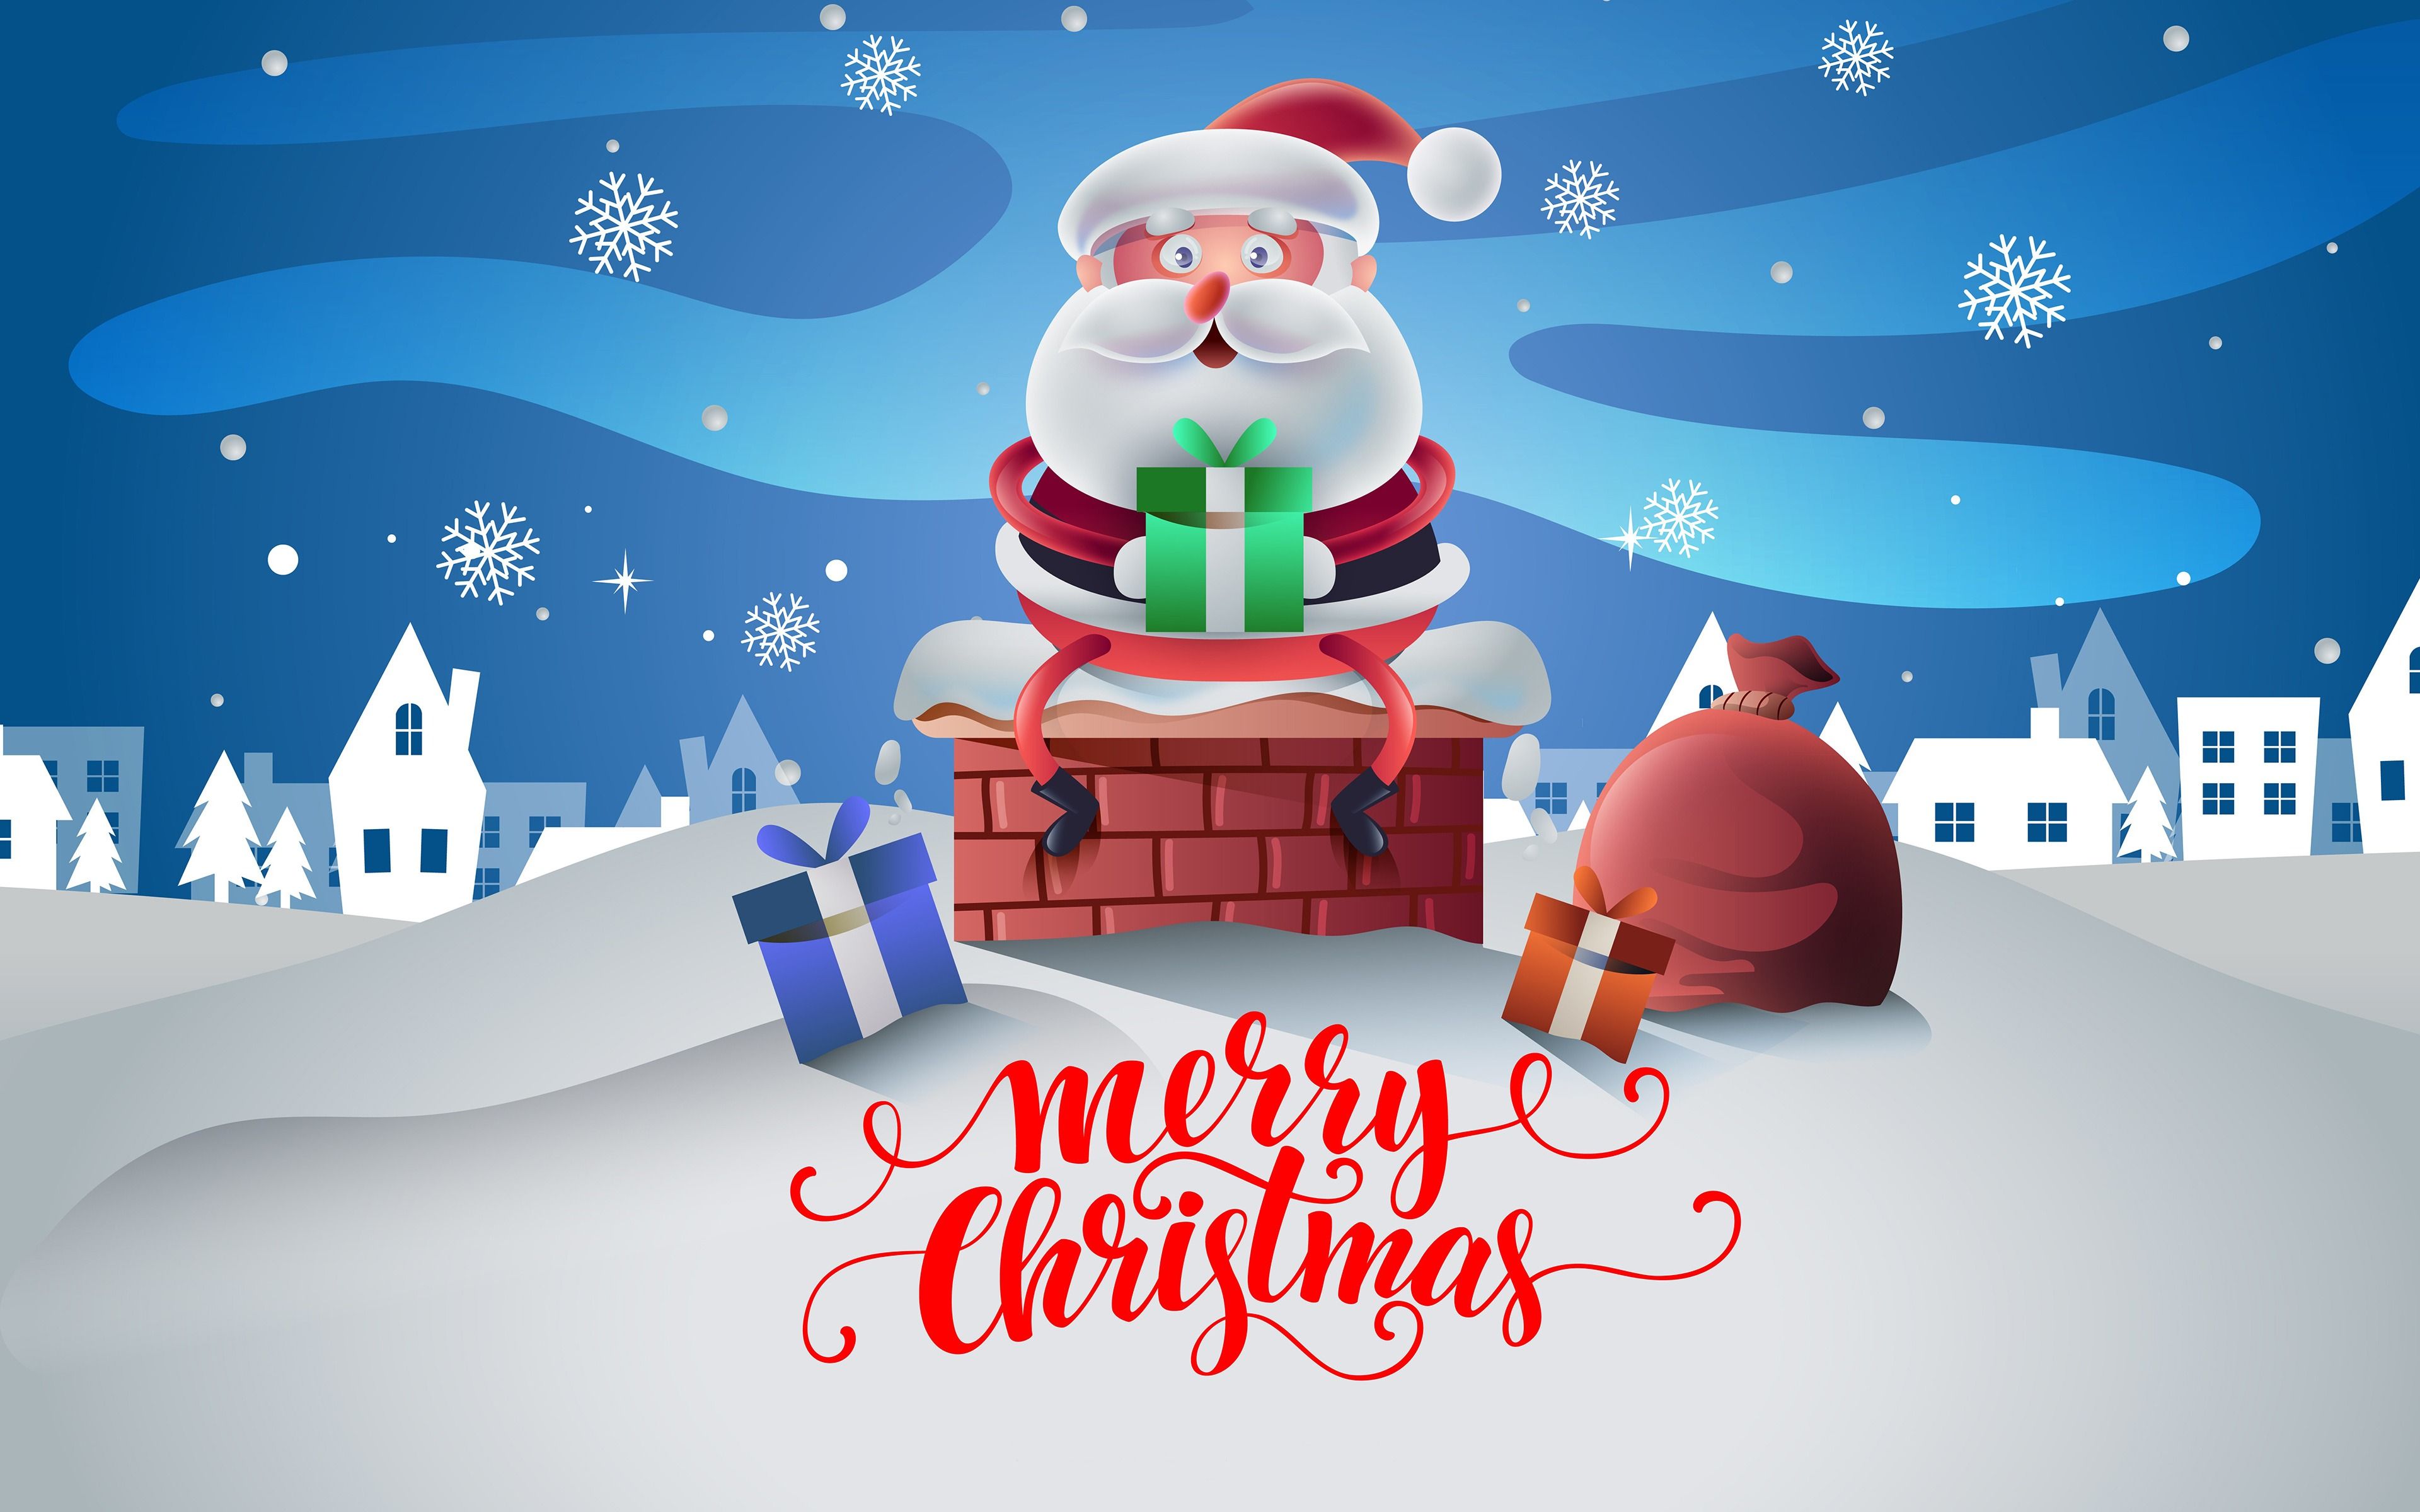 Download wallpaper Santa Claus with gifts, 4k, cartoon santa, winter, Happy New year, gift boxes, Christmas night, Merry Christmas, xmas, Christmas for desktop with resolution 3840x2400. High Quality HD picture wallpaper